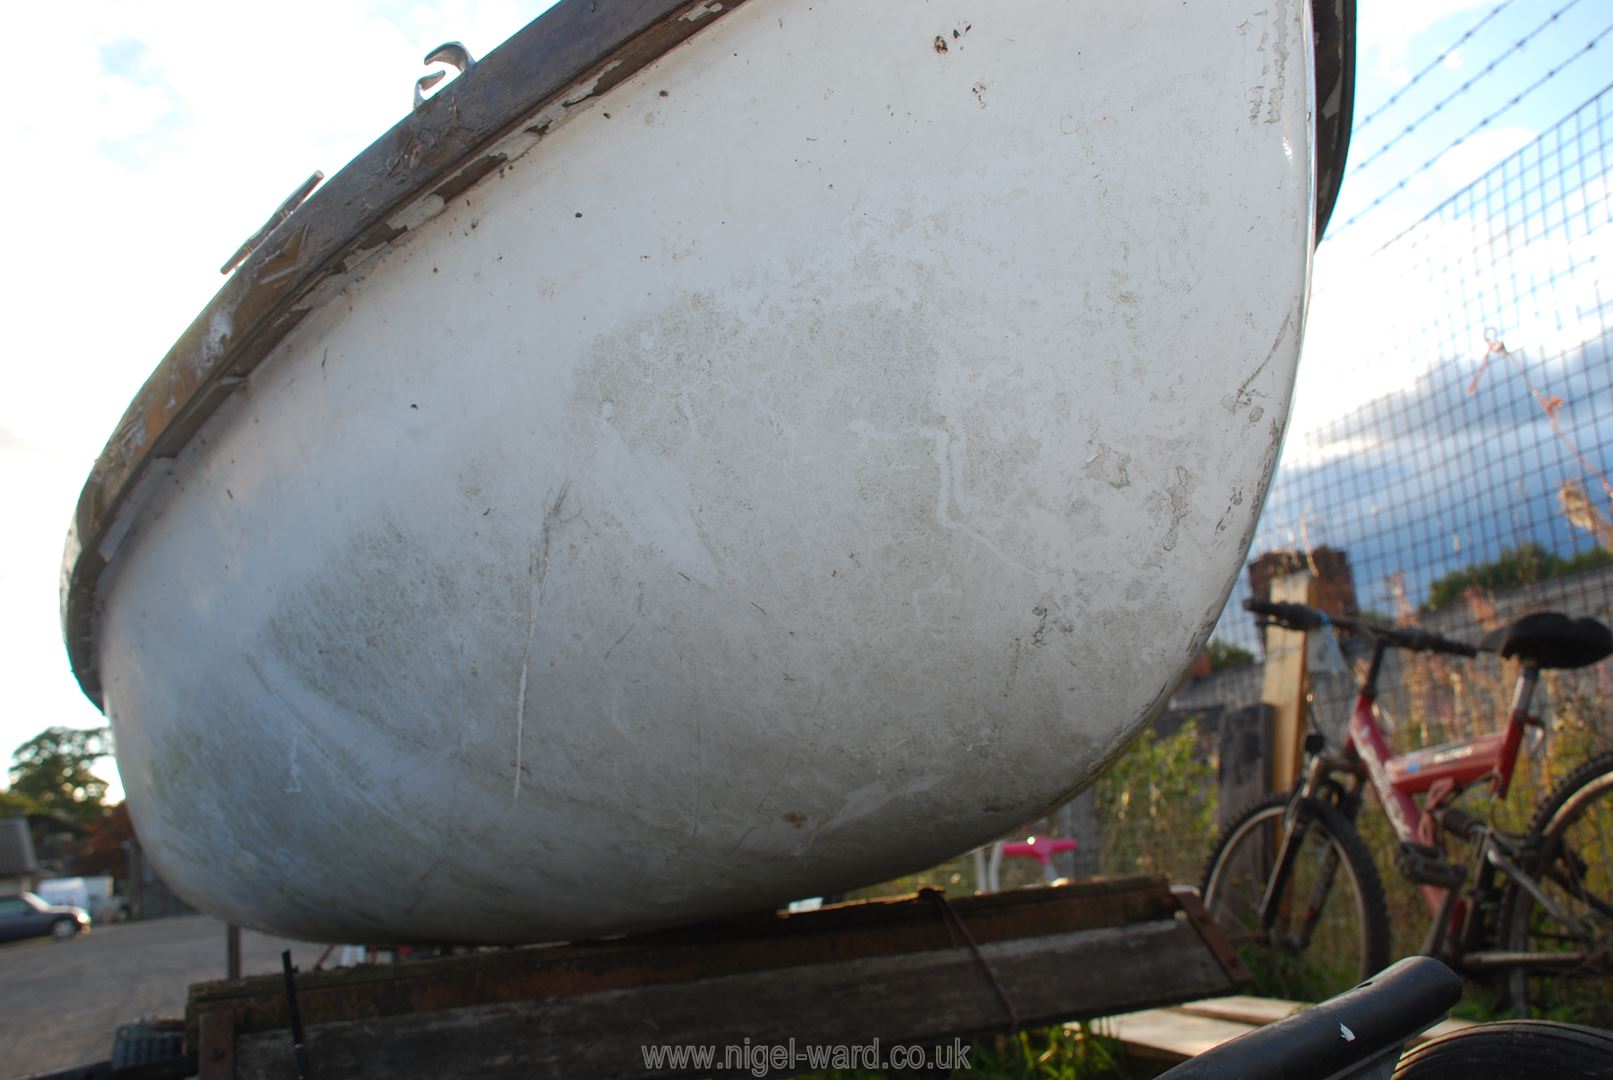 A glass fibre hulled sailing dinghy for restoration with 17' 2" high aluminium mast, fittings, - Image 9 of 14